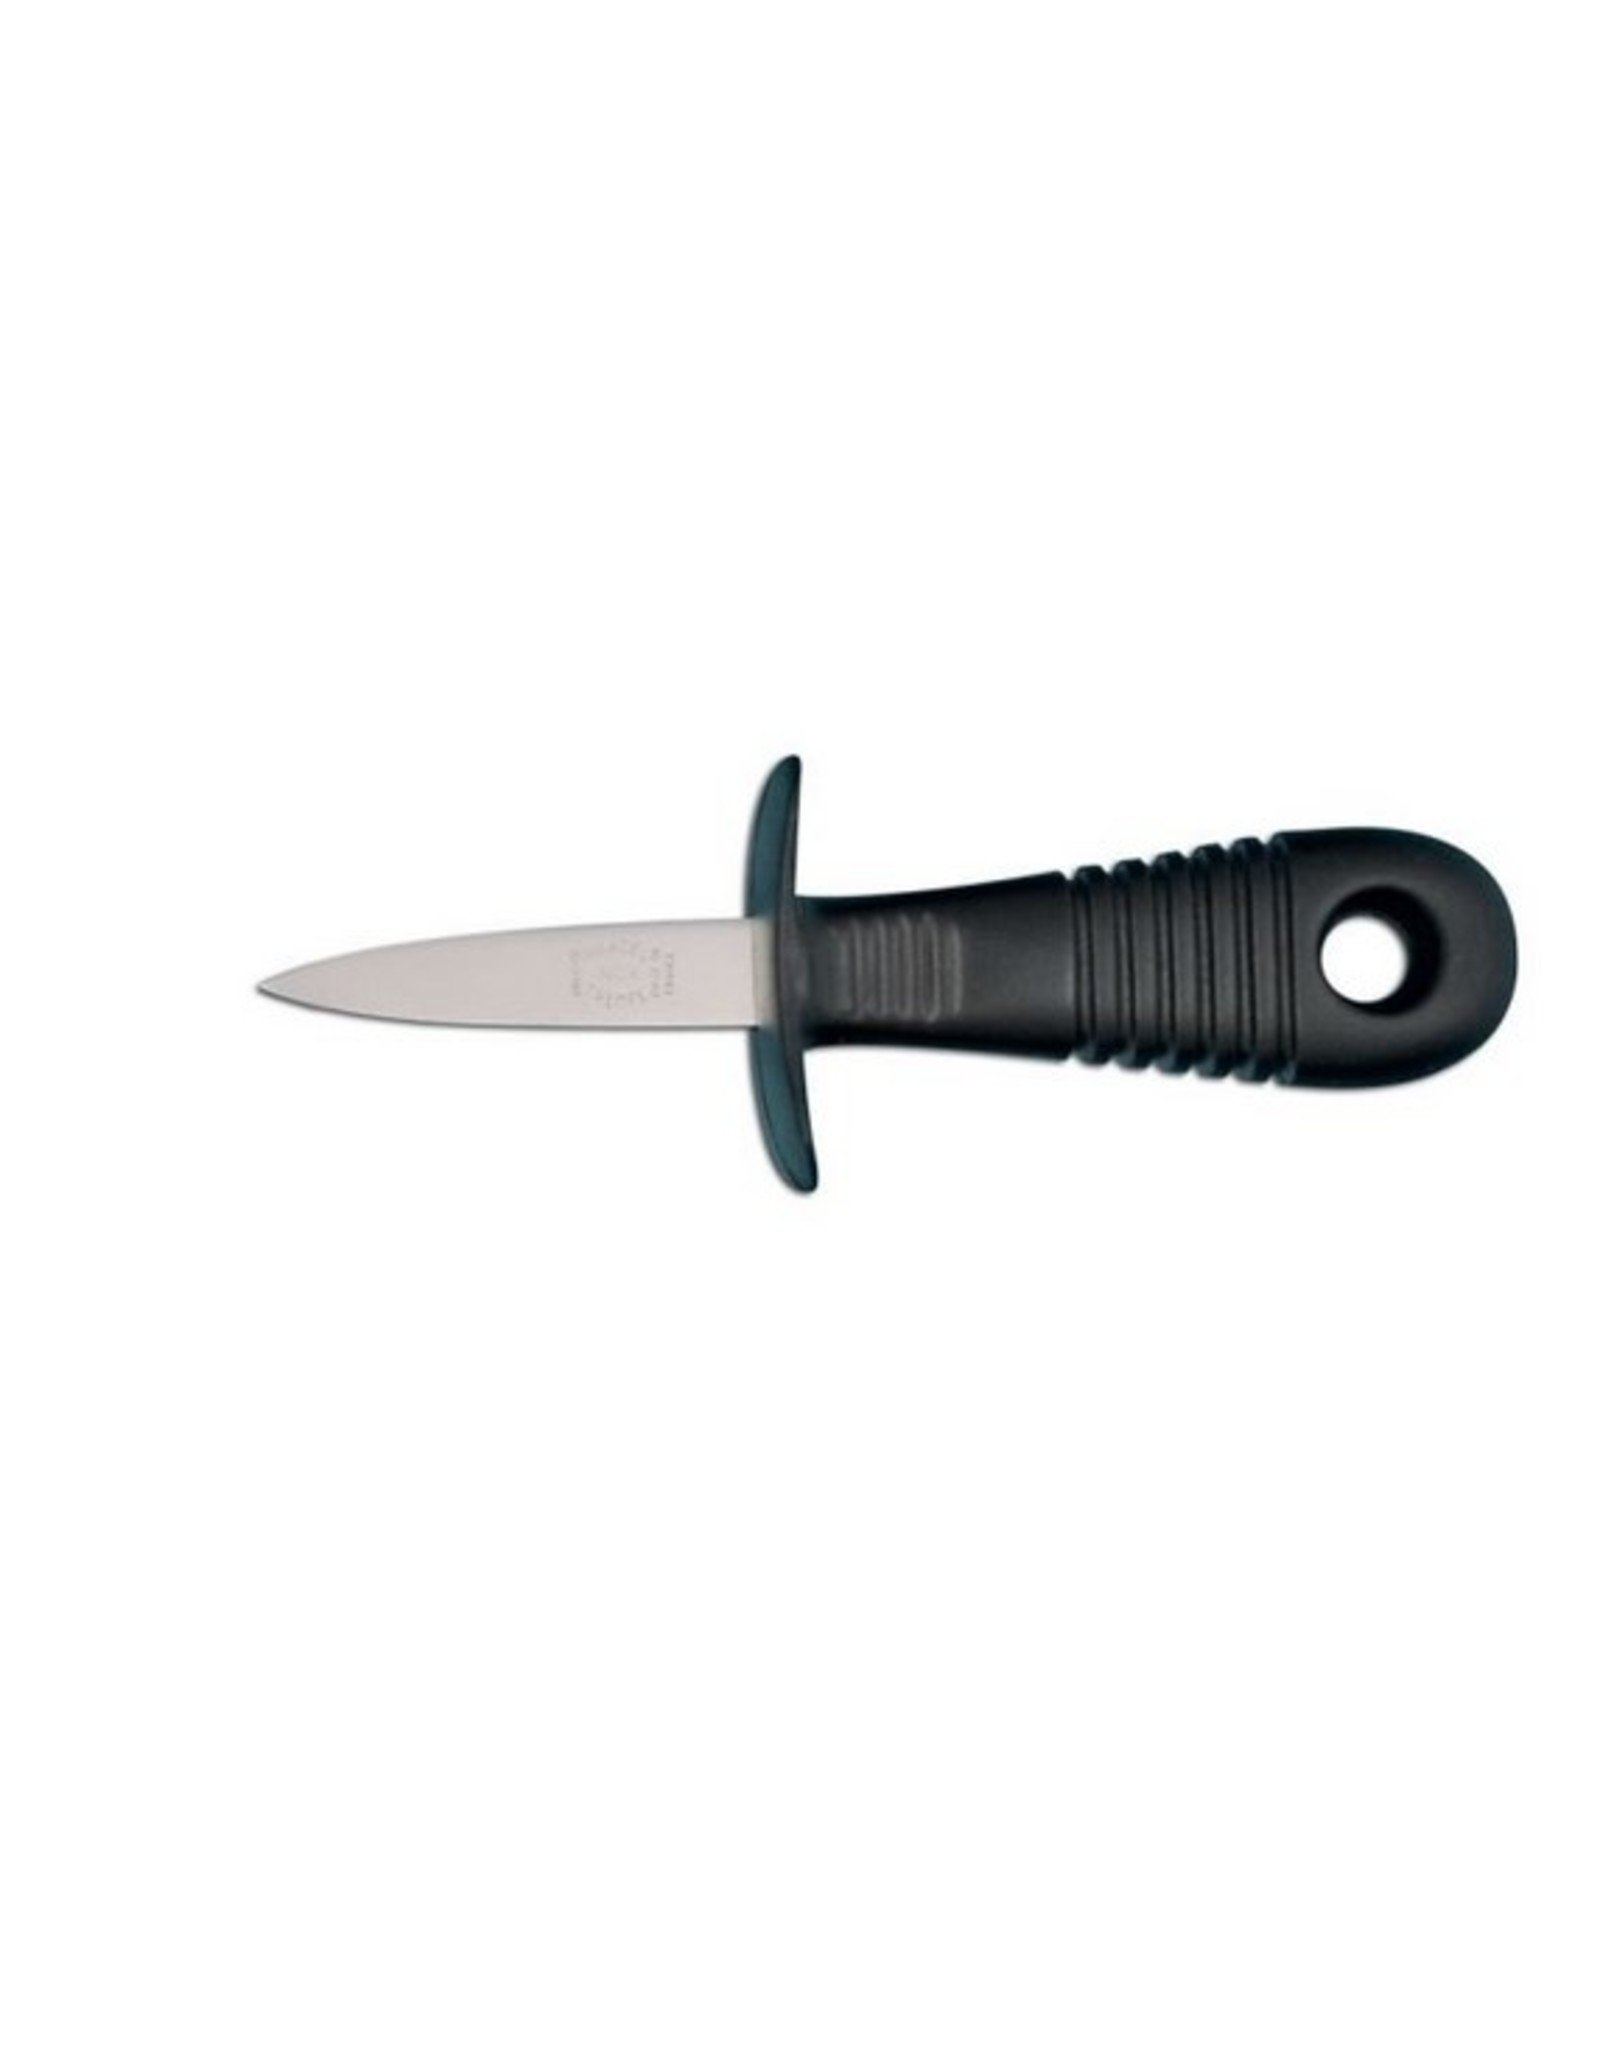 Andre Verdier Andre Verdier Oyster Knife with Guard Stainless Steel/Black